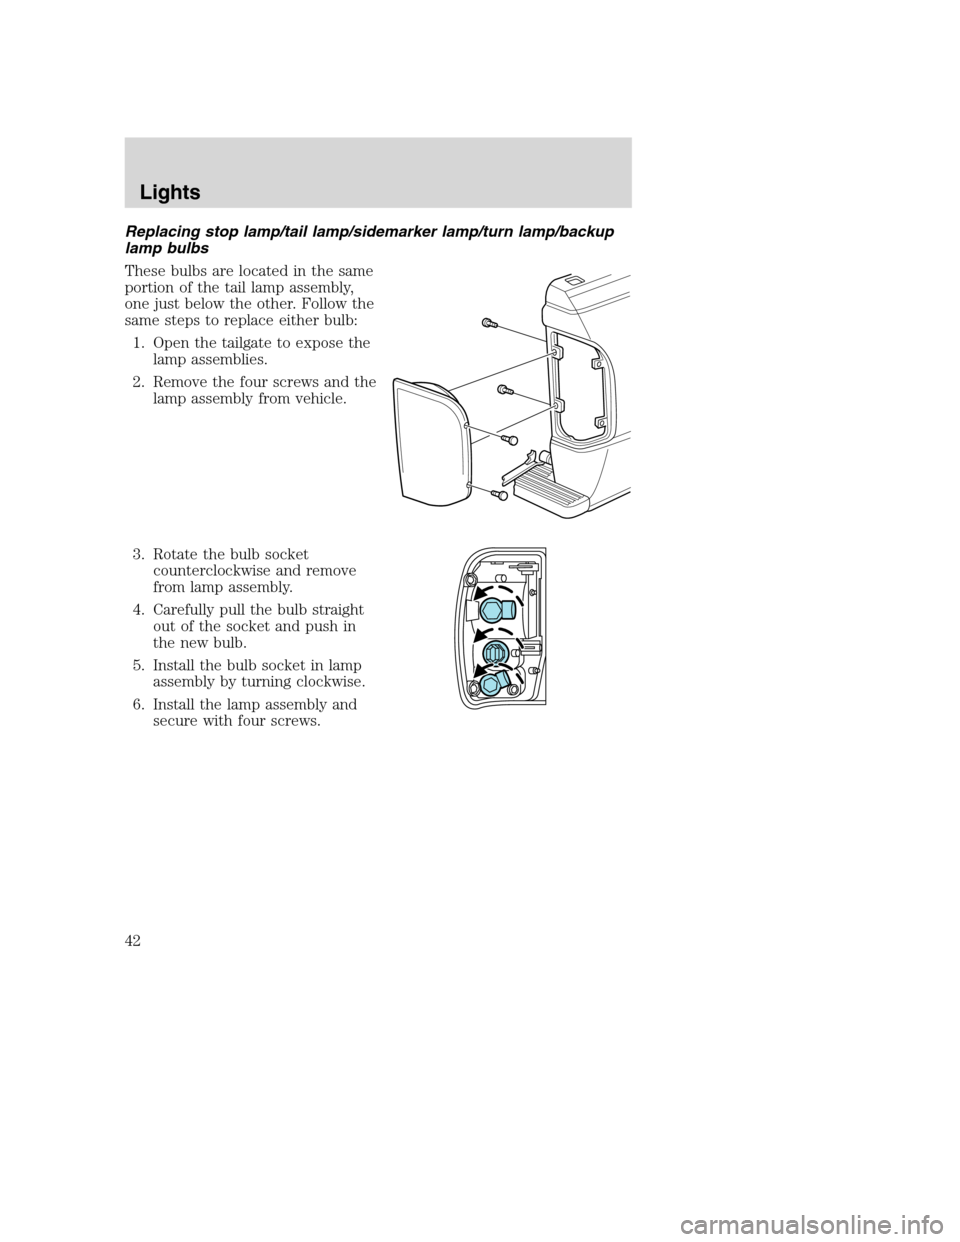 MAZDA MODEL B-SERIES 2005  Owners Manual (in English) Replacing stop lamp/tail lamp/sidemarker lamp/turn lamp/backup
lamp bulbs
These bulbs are located in the same
portion of the tail lamp assembly,
one just below the other. Follow the
same steps to repl